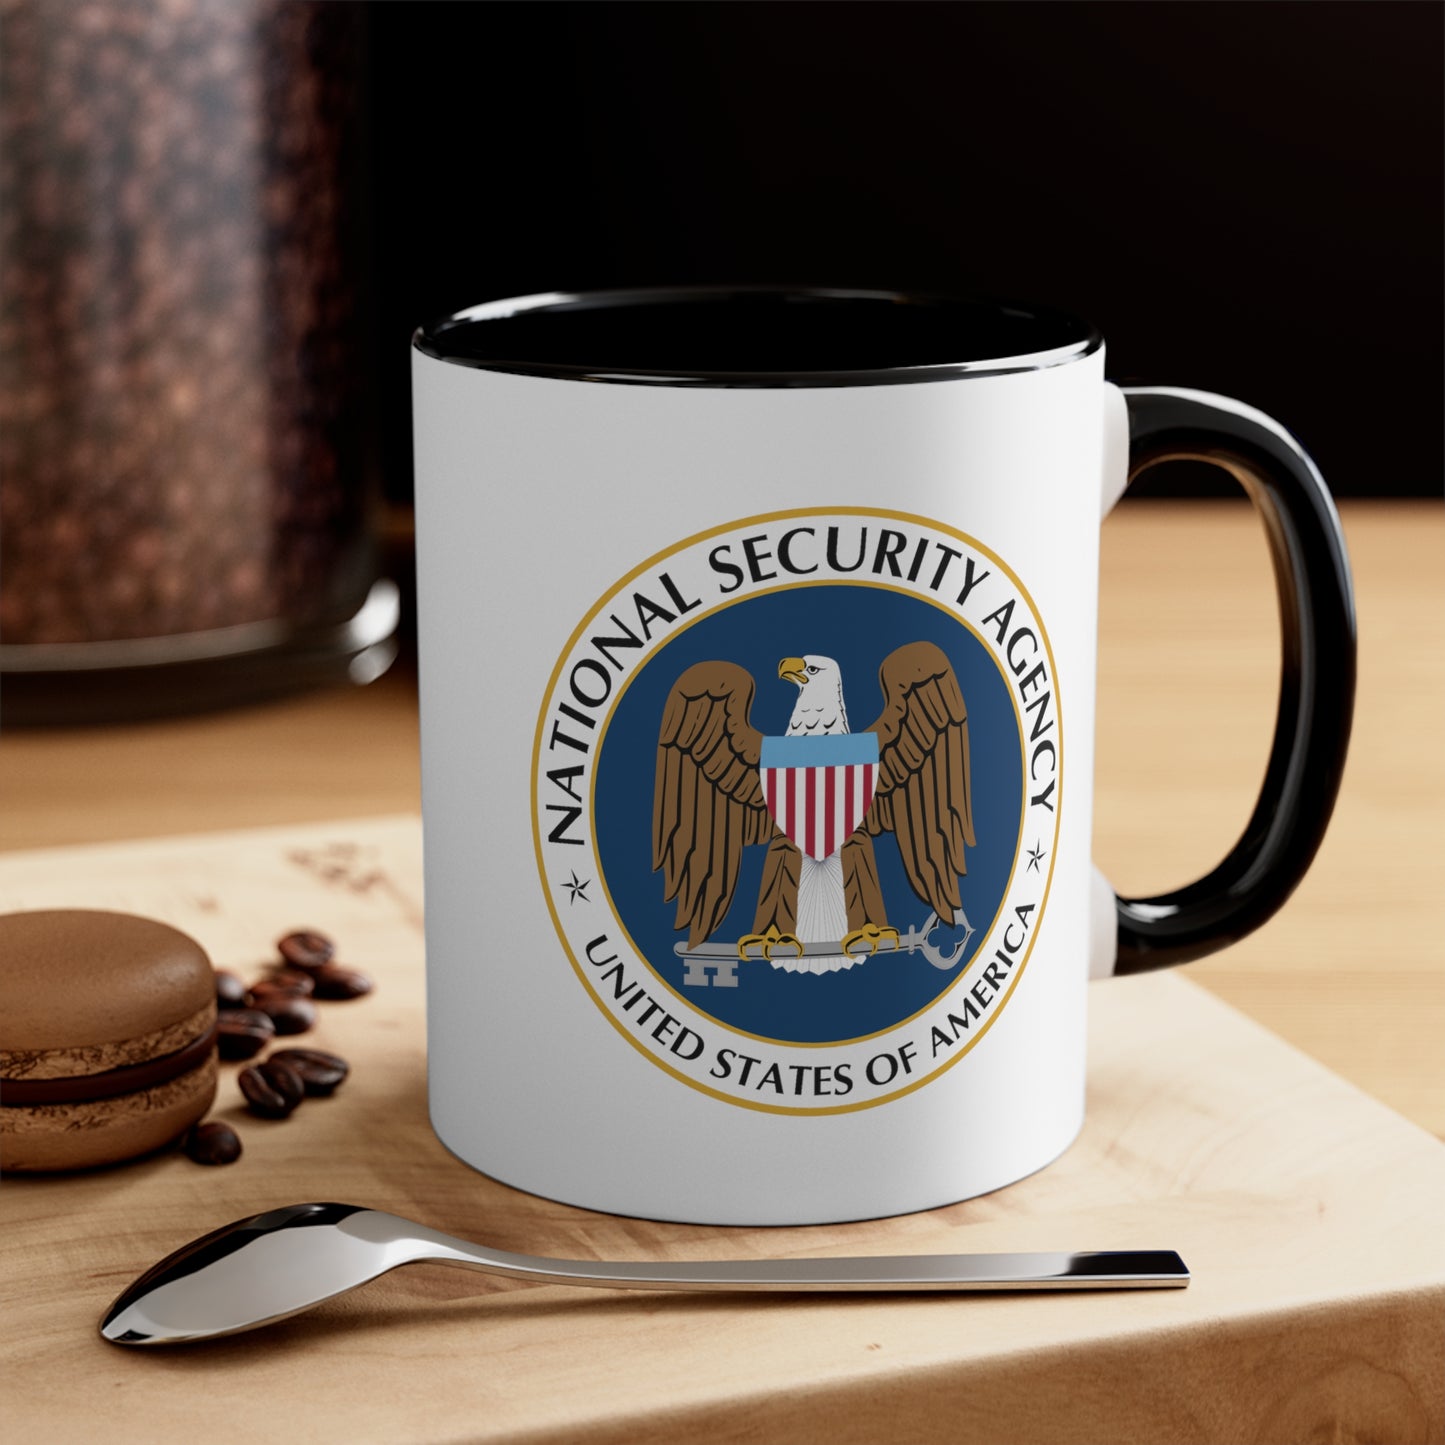 National Security Agency Coffee Mug - Double Sided Black Accent White Ceramic 11oz by TheGlassyLass.com